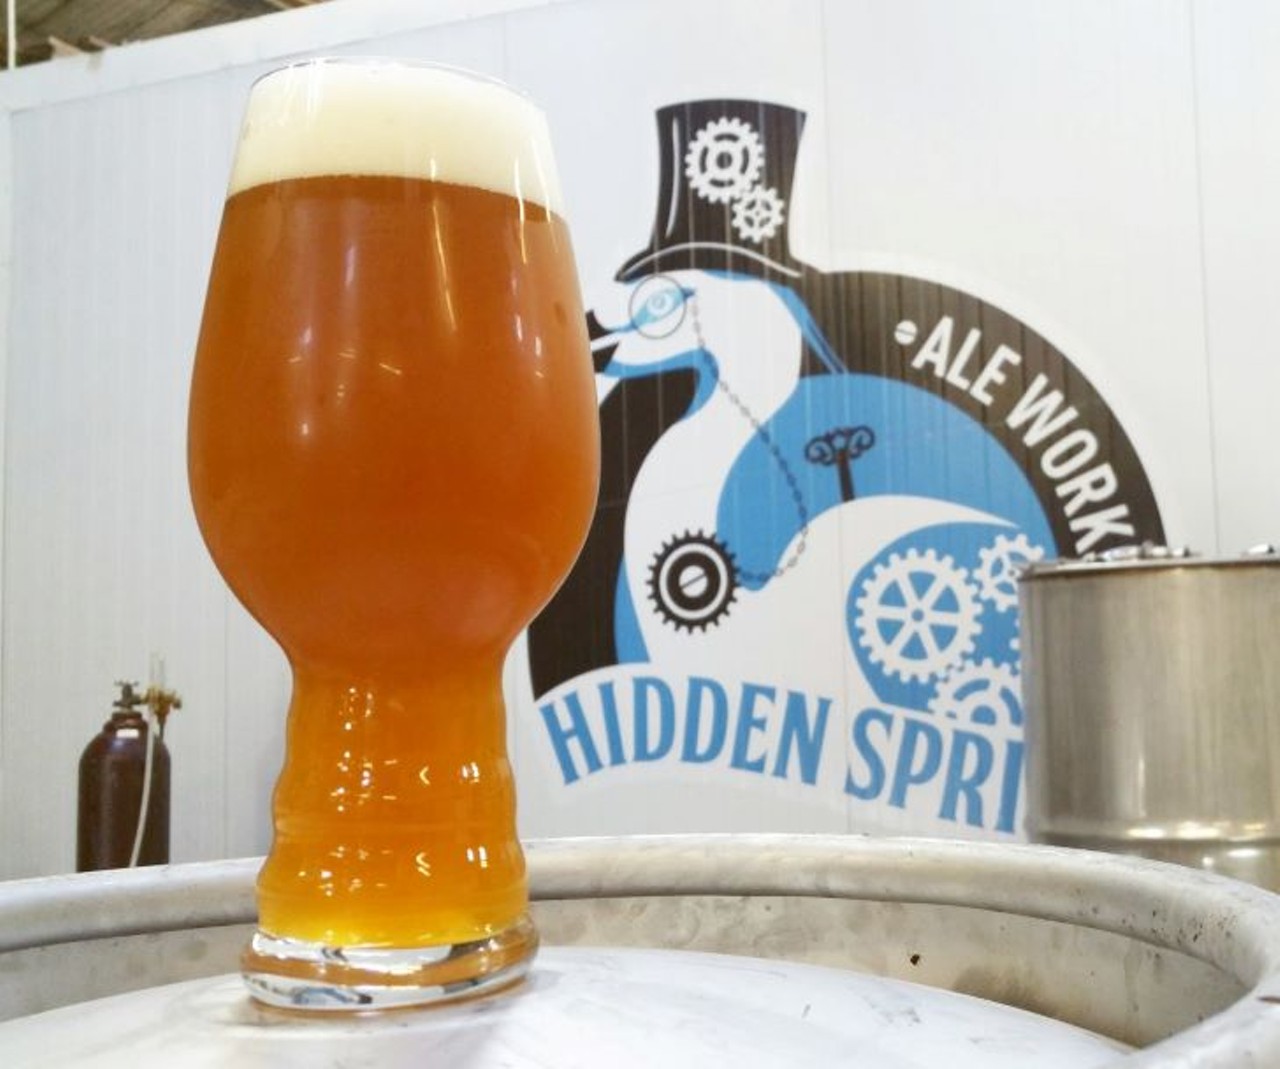 Hidden Springs Ale Works
(813) 226-2739. hiddenspringsaleworks.com  
The Tampa Heights brewery is still slinging tall boys, bottles and crowlers to go. The brewery has even teamed up with Weymouth, Massachusetts&#146; Vitamin Sea Brewery to come up with a long distance beer collaboration: the S P A R K L I N G I S O L A T I O N double IPA, which should be available in the coming weeks. In the meantime, you can order 4-packs online. 1631 N. Franklin St., Tampa. 
Photo via Hidden Springs Ale Works/Facebook